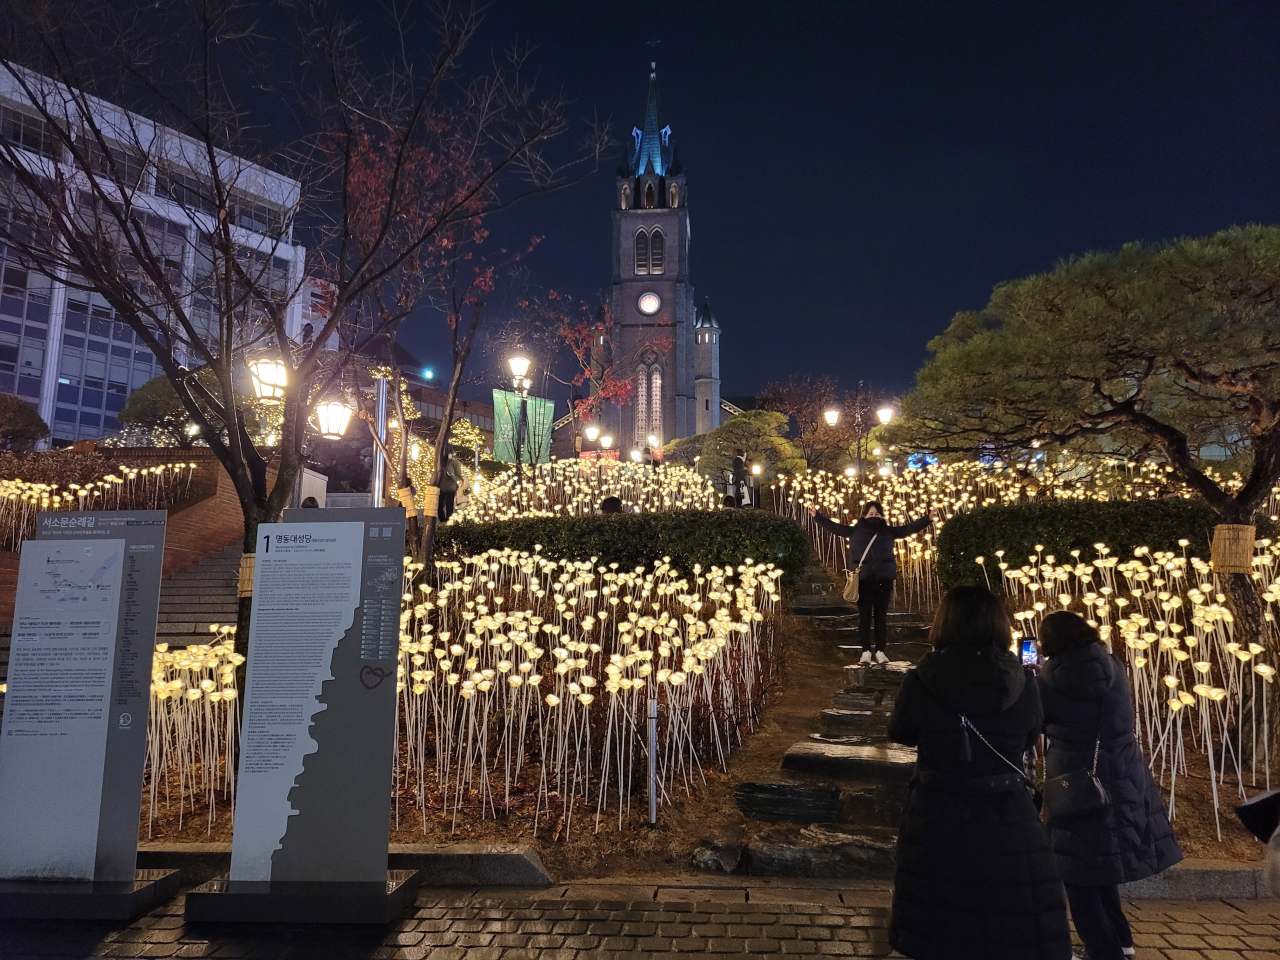 Visitors take photographs at Myeongdong Cathedral, decorated with lights in celebration of Christmas, in Seoul, Monday. (Park Yuna/The Korea Herald)